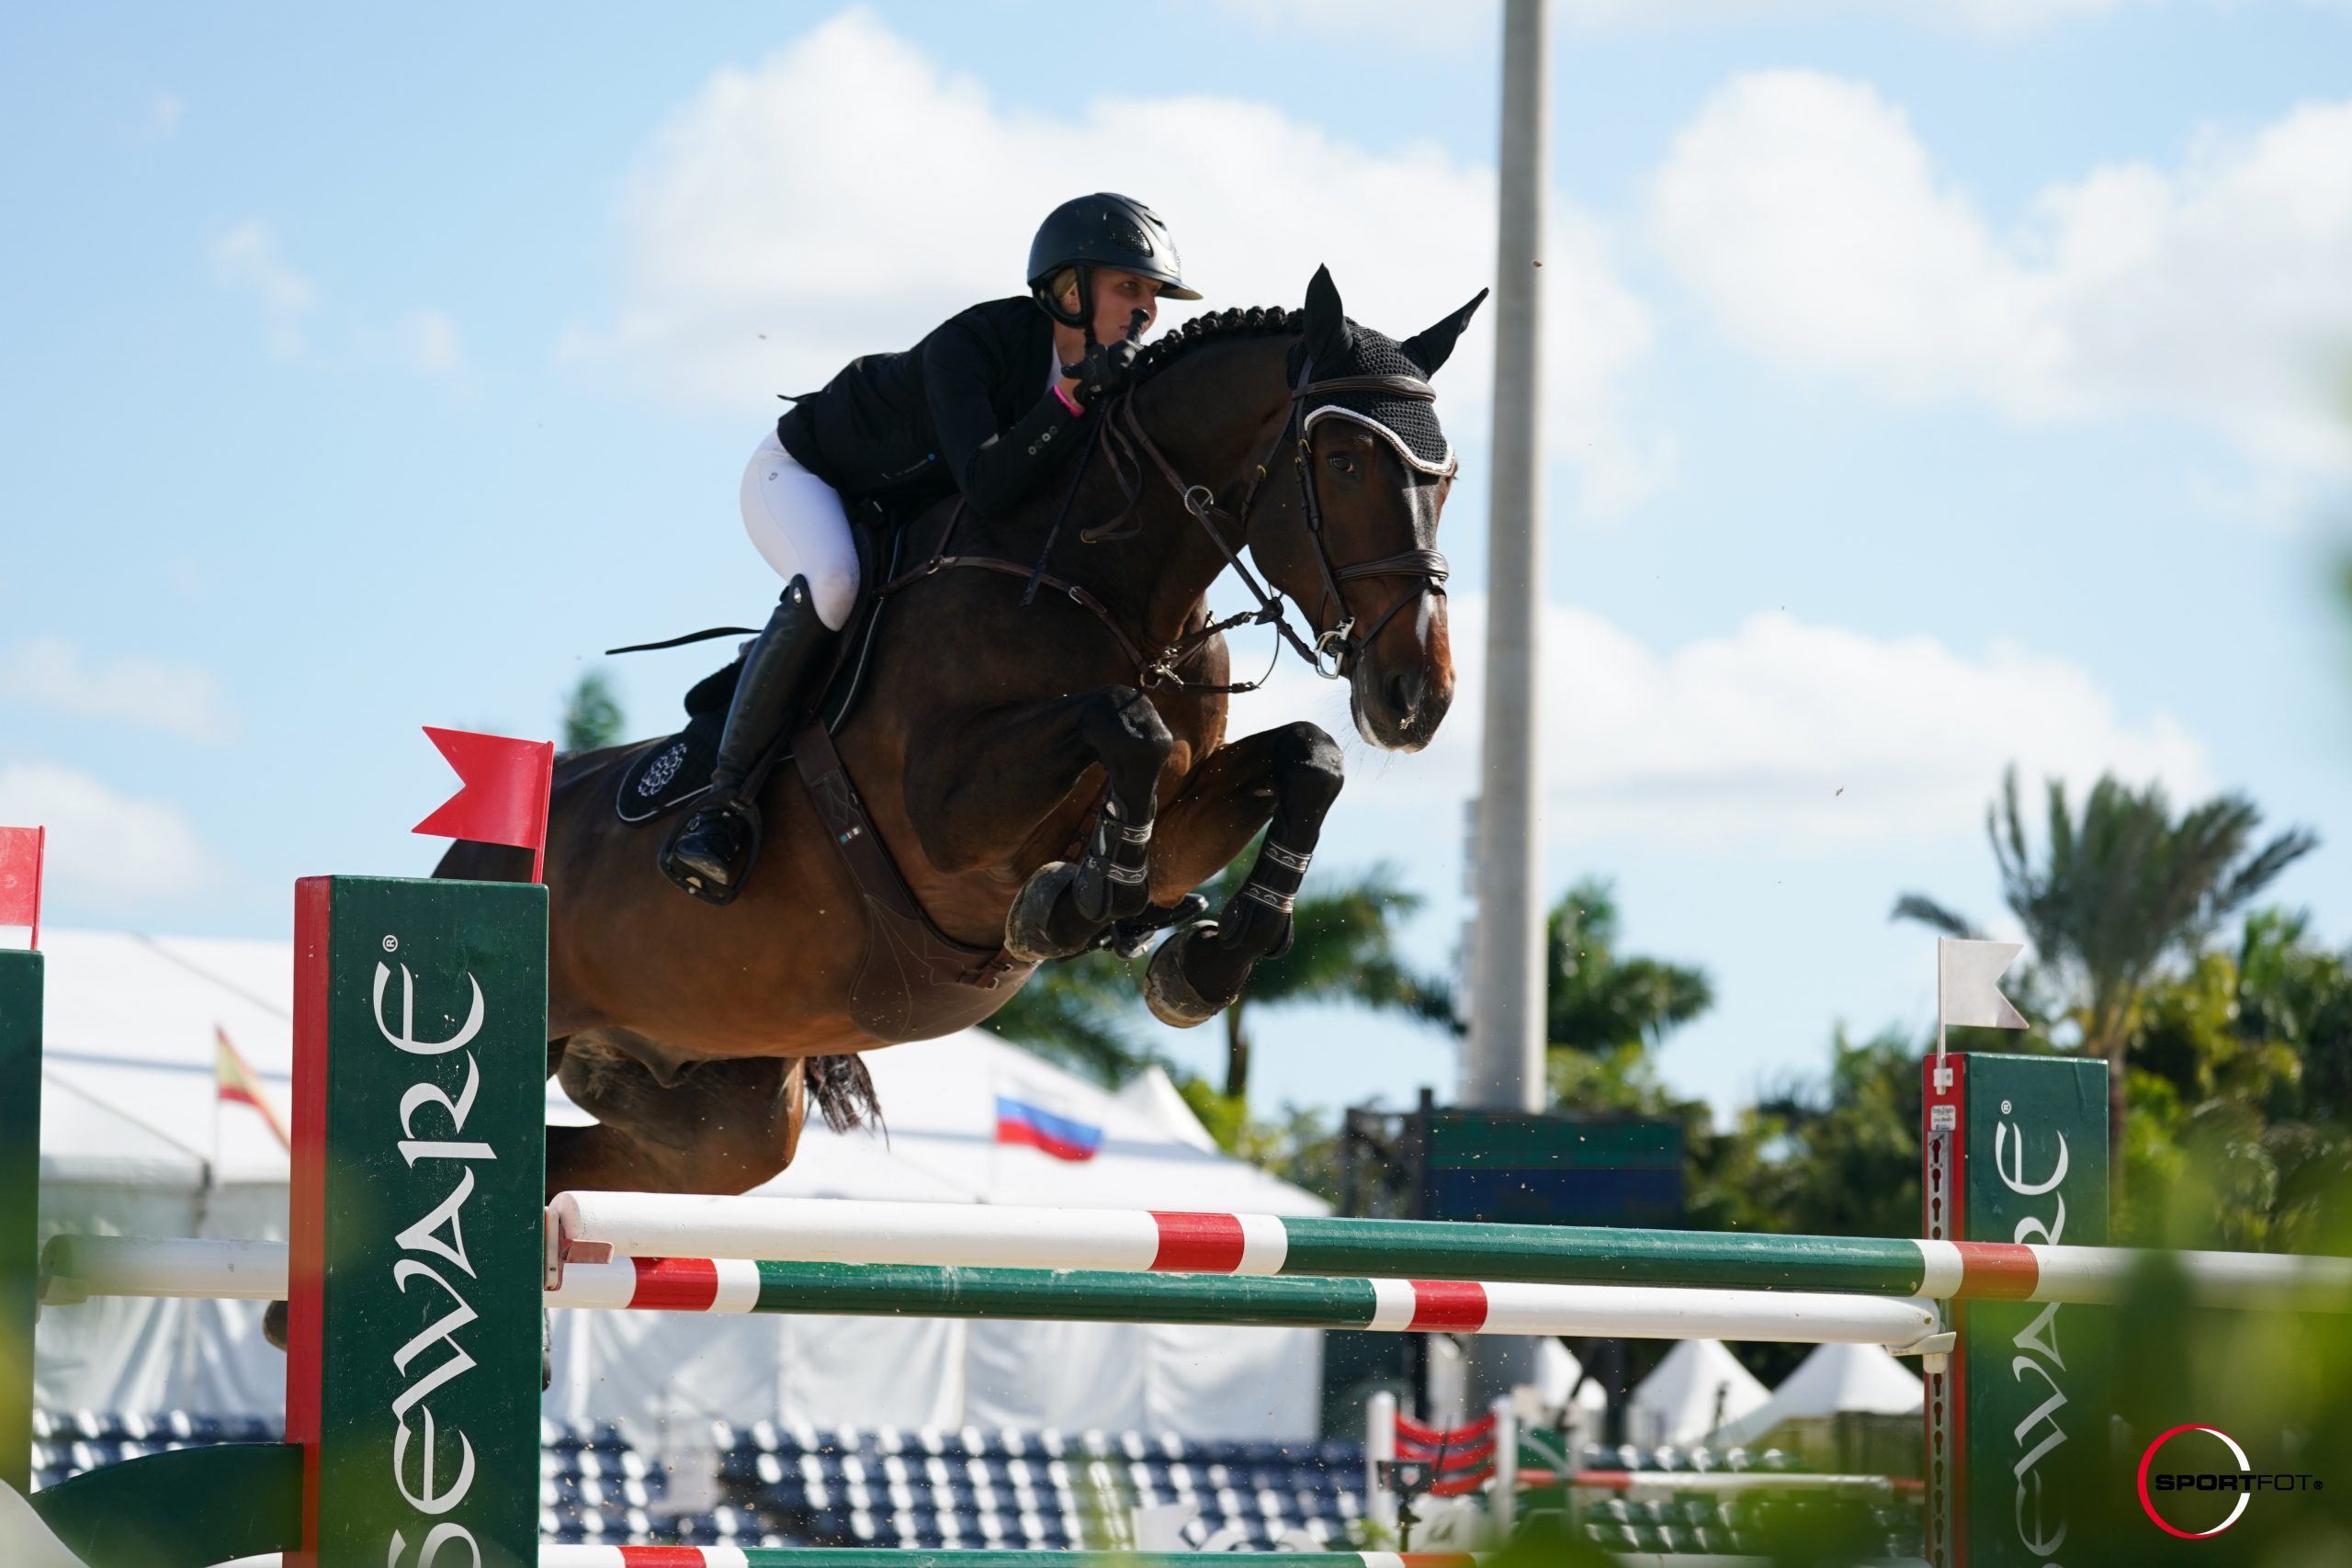 Reference Nespresso van’t Laekhof and Natalie Dean taking the 7th and 9th place in last weeks 1.45m classes.